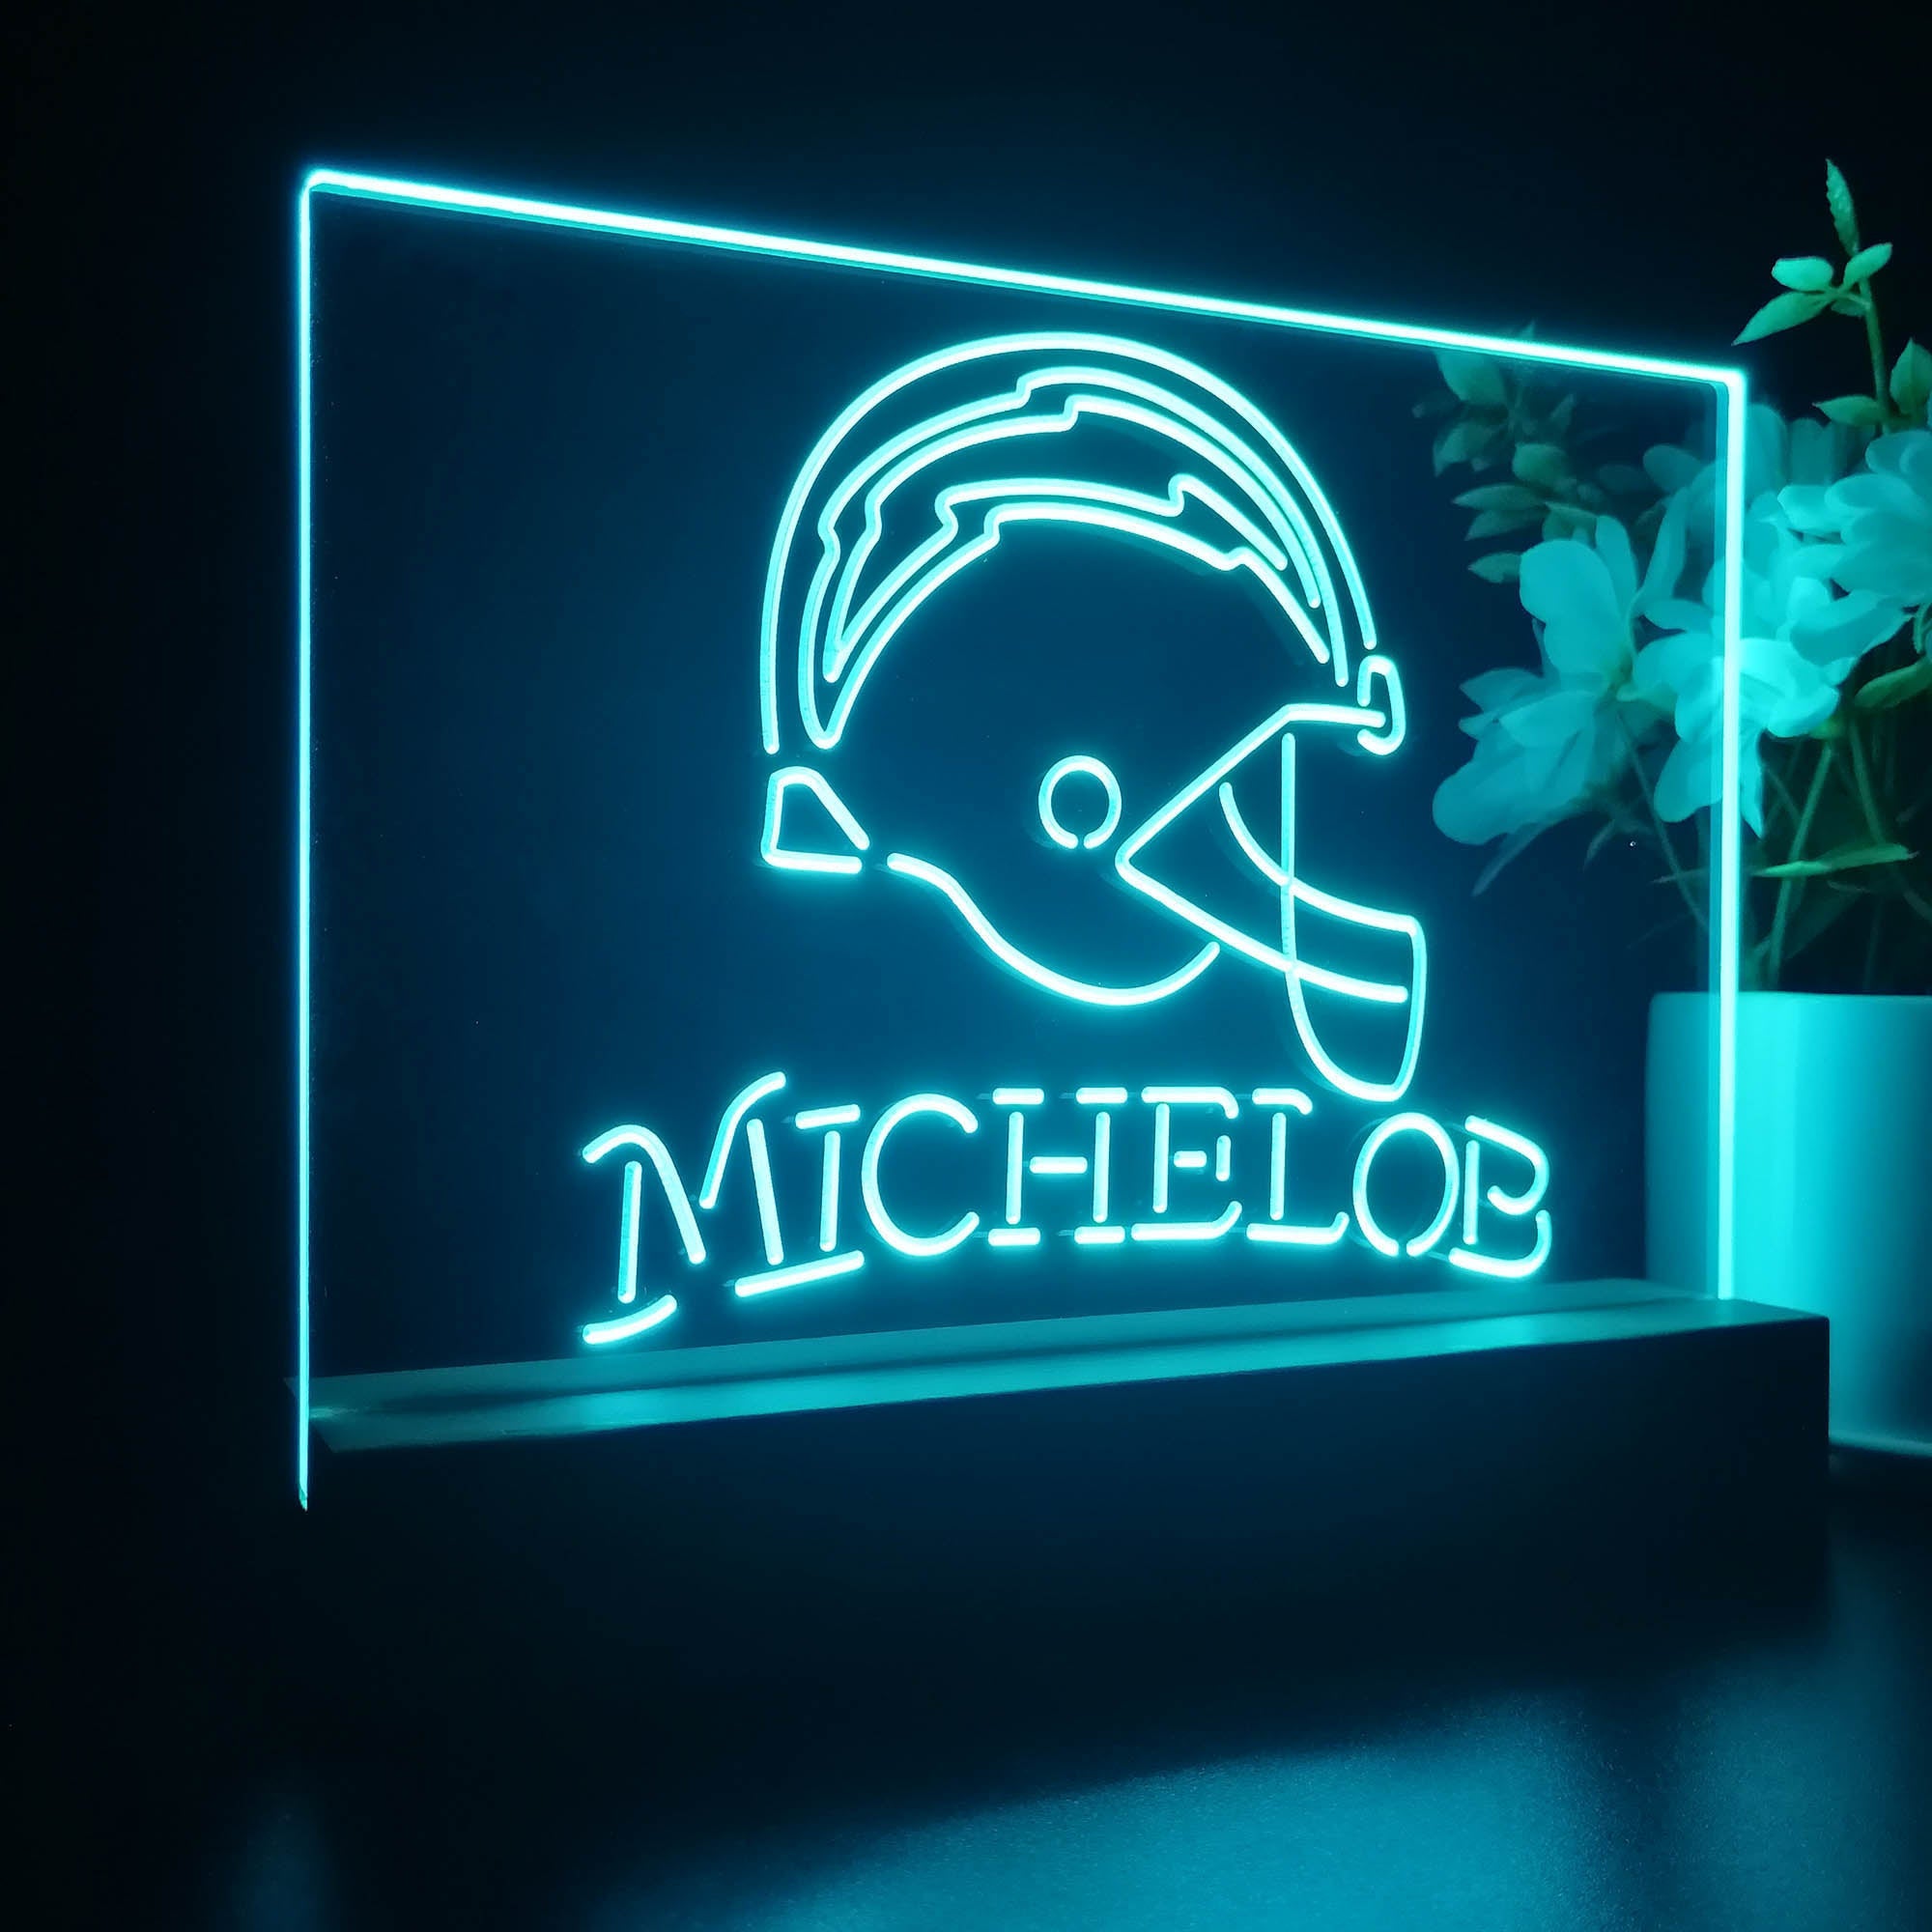 Michelob Bar Los Angeles Chargers 3D Illusion Night Light Desk Lamp